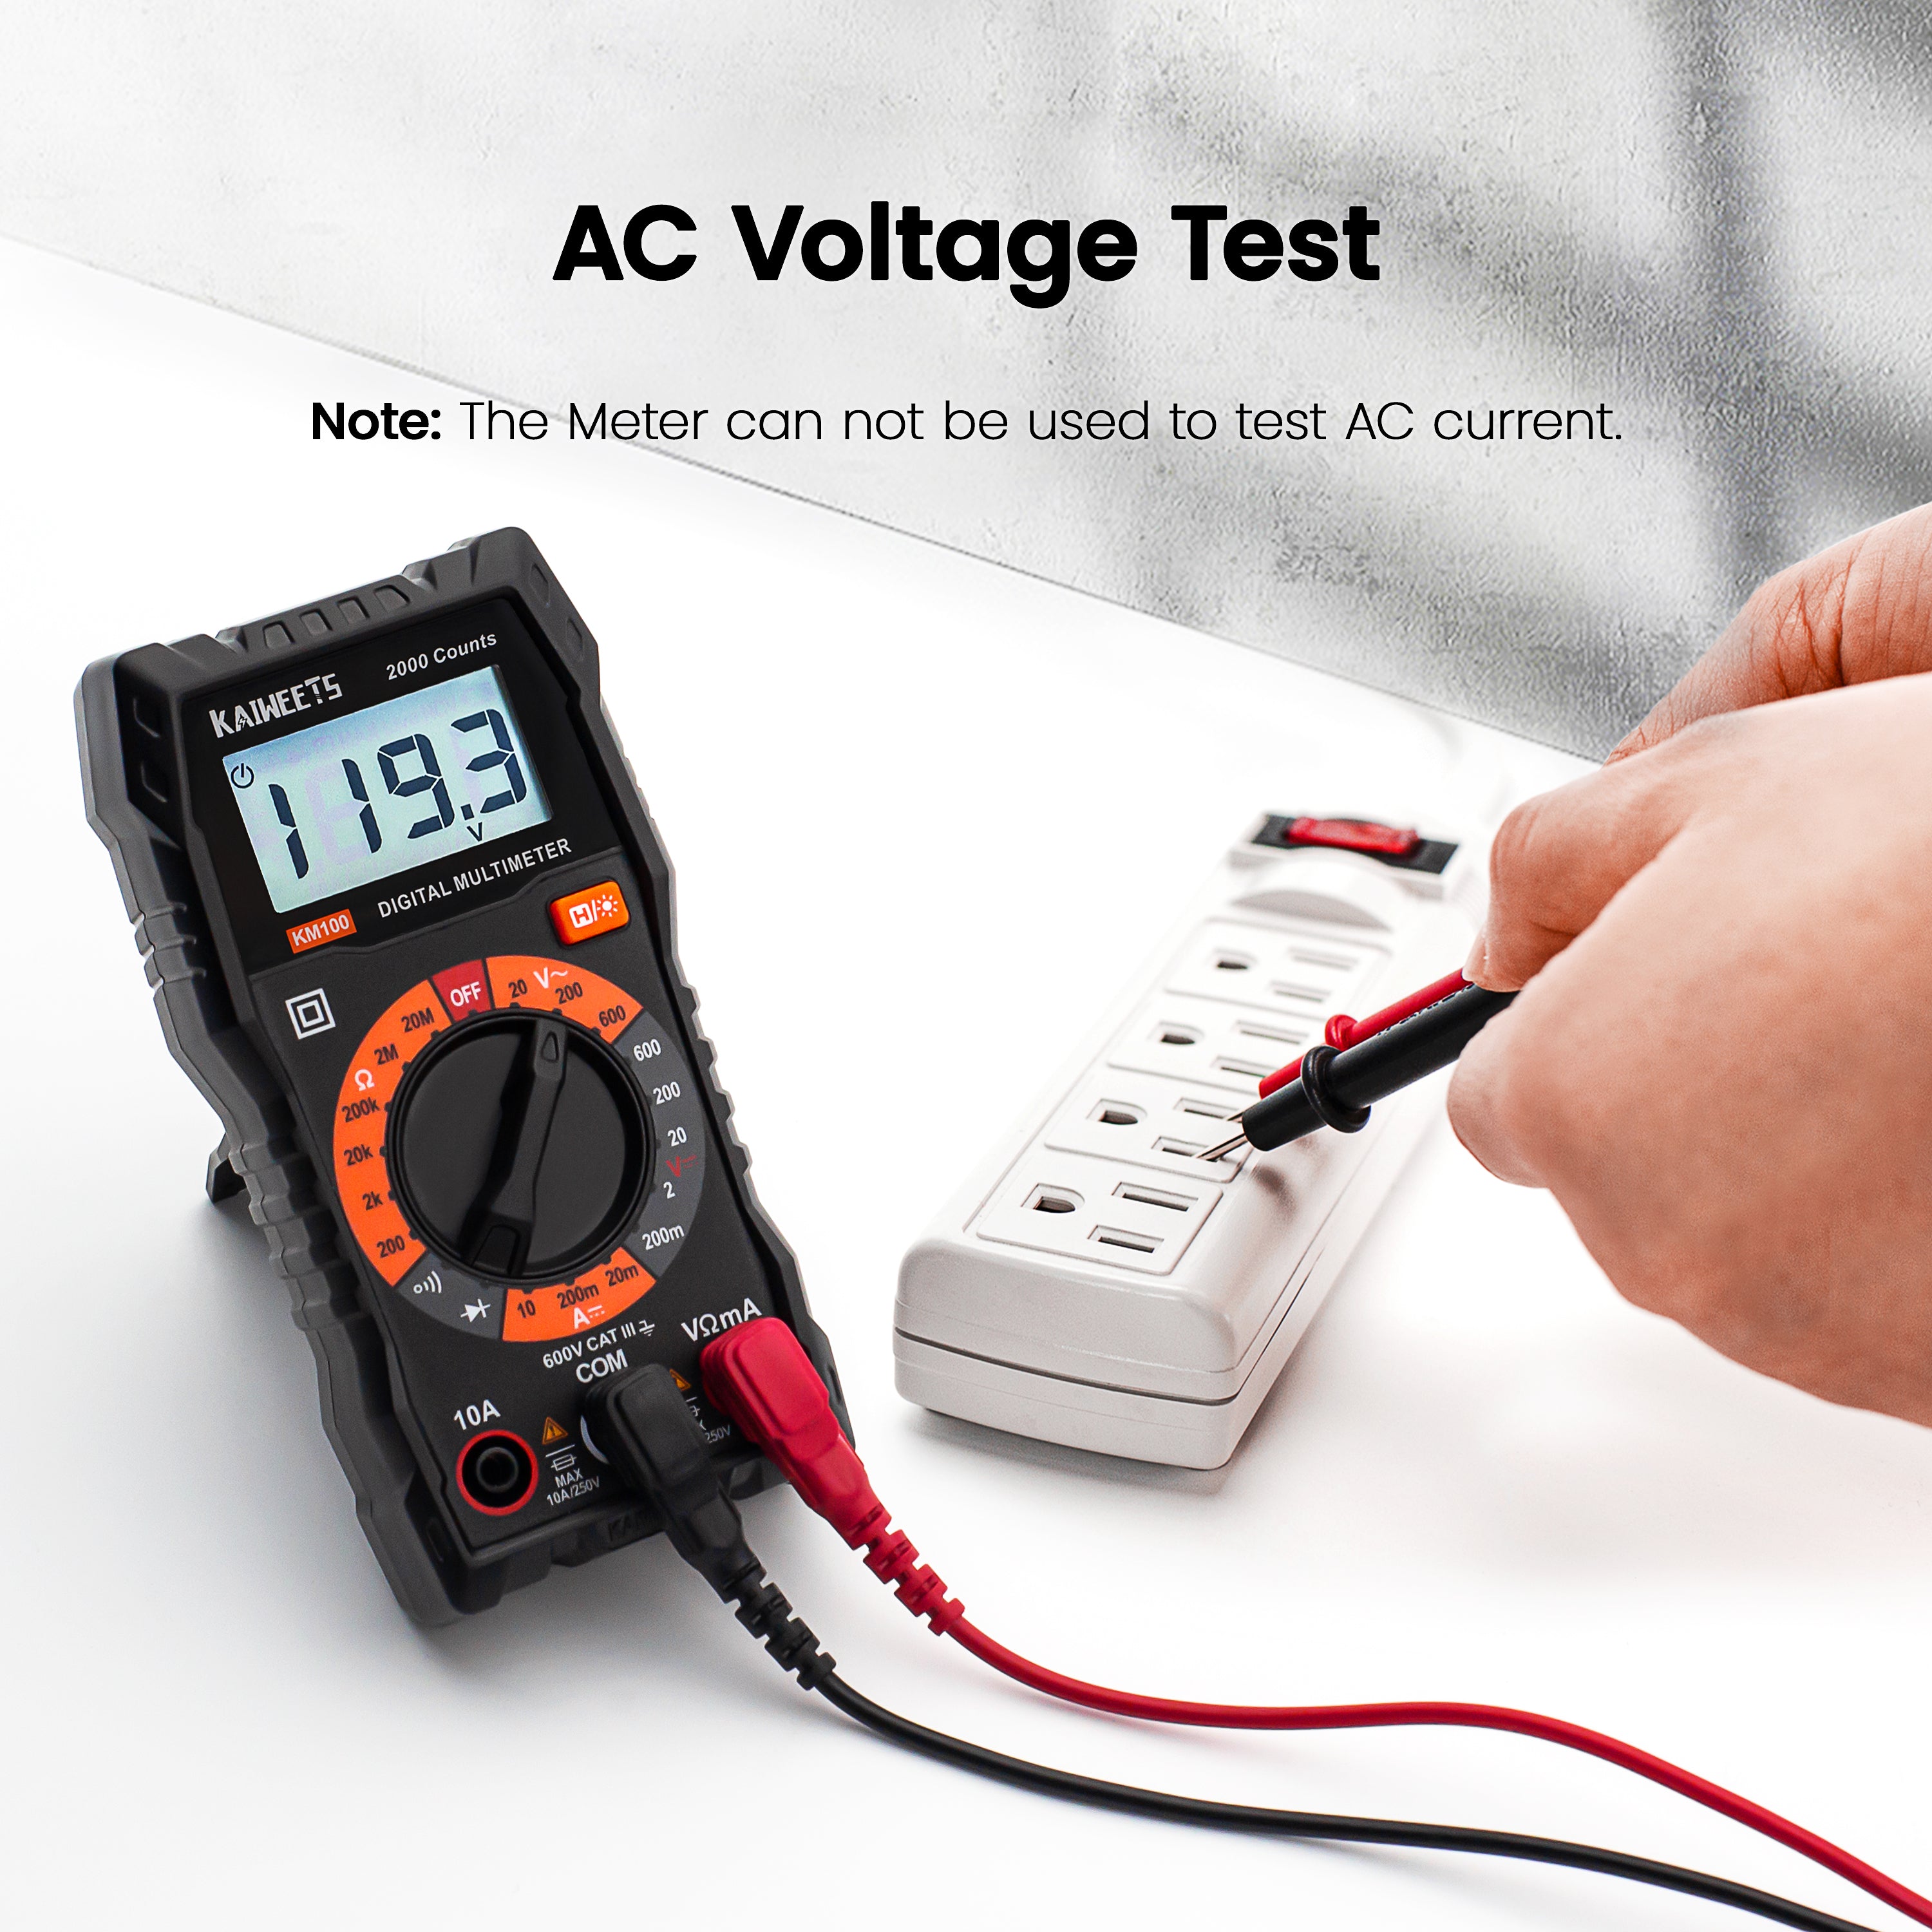 KAIWEETS Digital Multimeter with Case, DC AC Voltmeter, Ohm Volt Amp Test Meter and Continuity Test Diode Voltage Tester for Household Outlet, Automotive Battery Test (Anti-Burn with Double Fuses) - 0